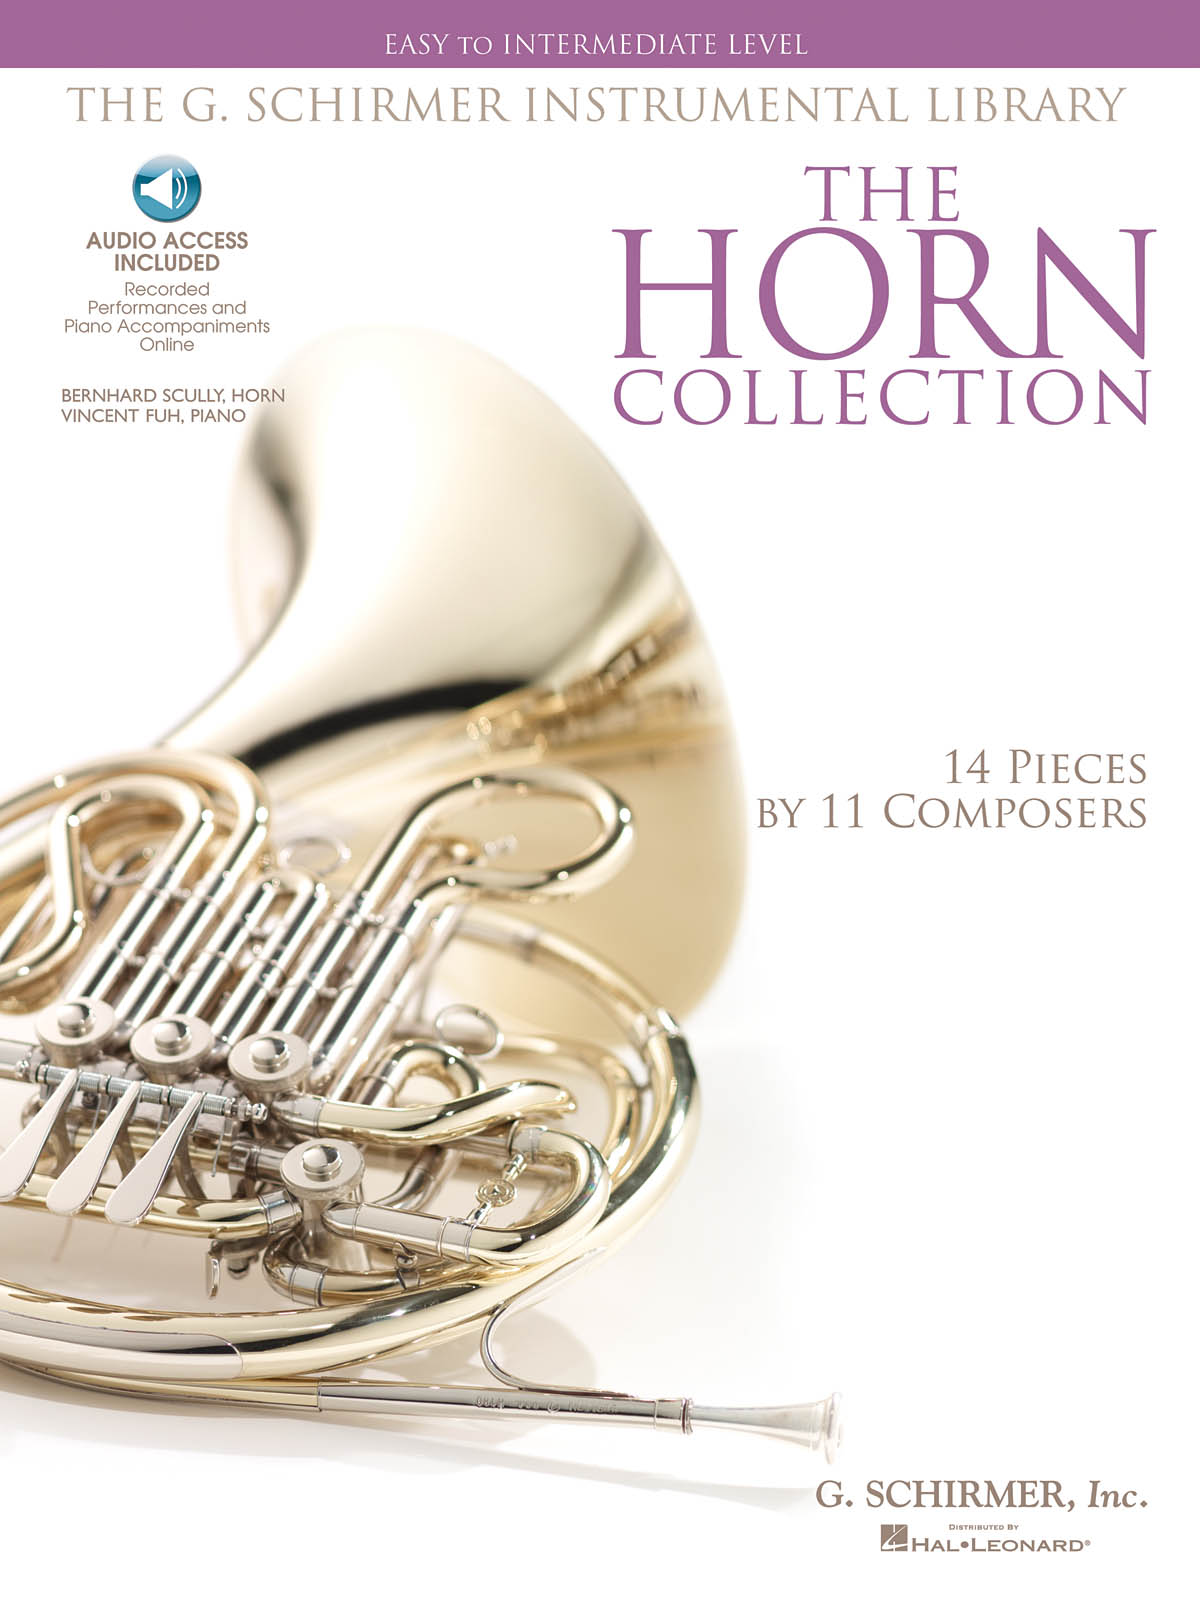 The Horn Collection - Easy to Intermediate Level / G. Schirmer Instrumental Library